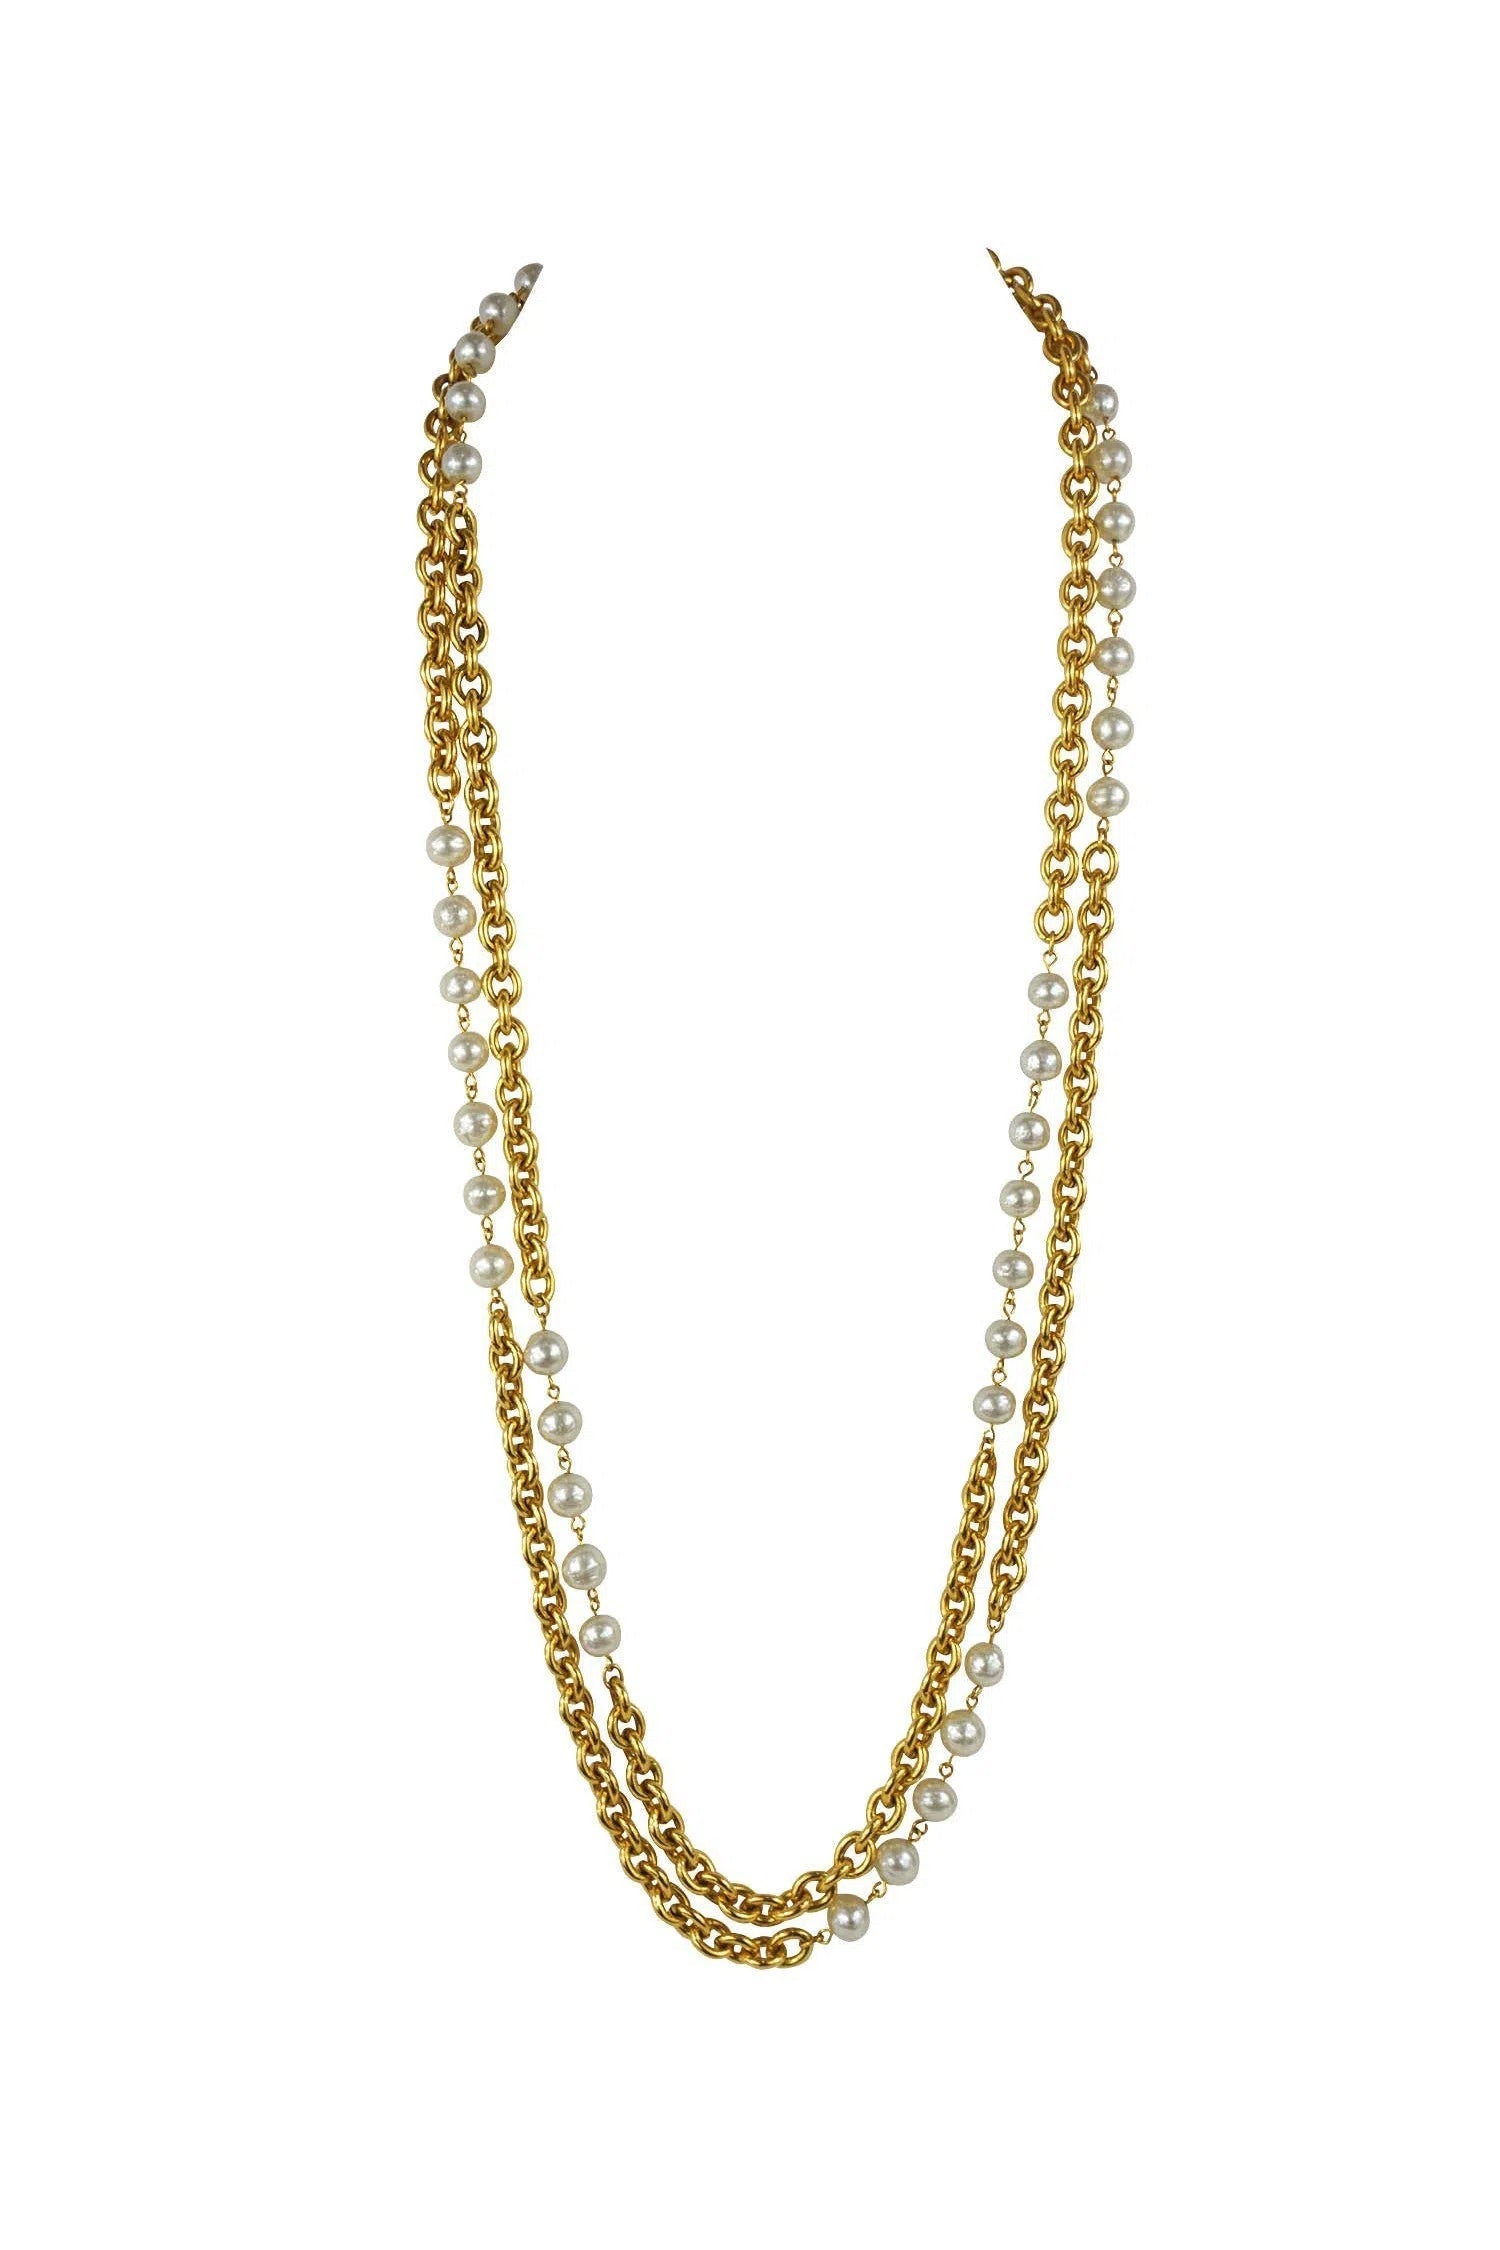 Chanel Vintage 2 Strand Pearl Chain Necklace 1990's